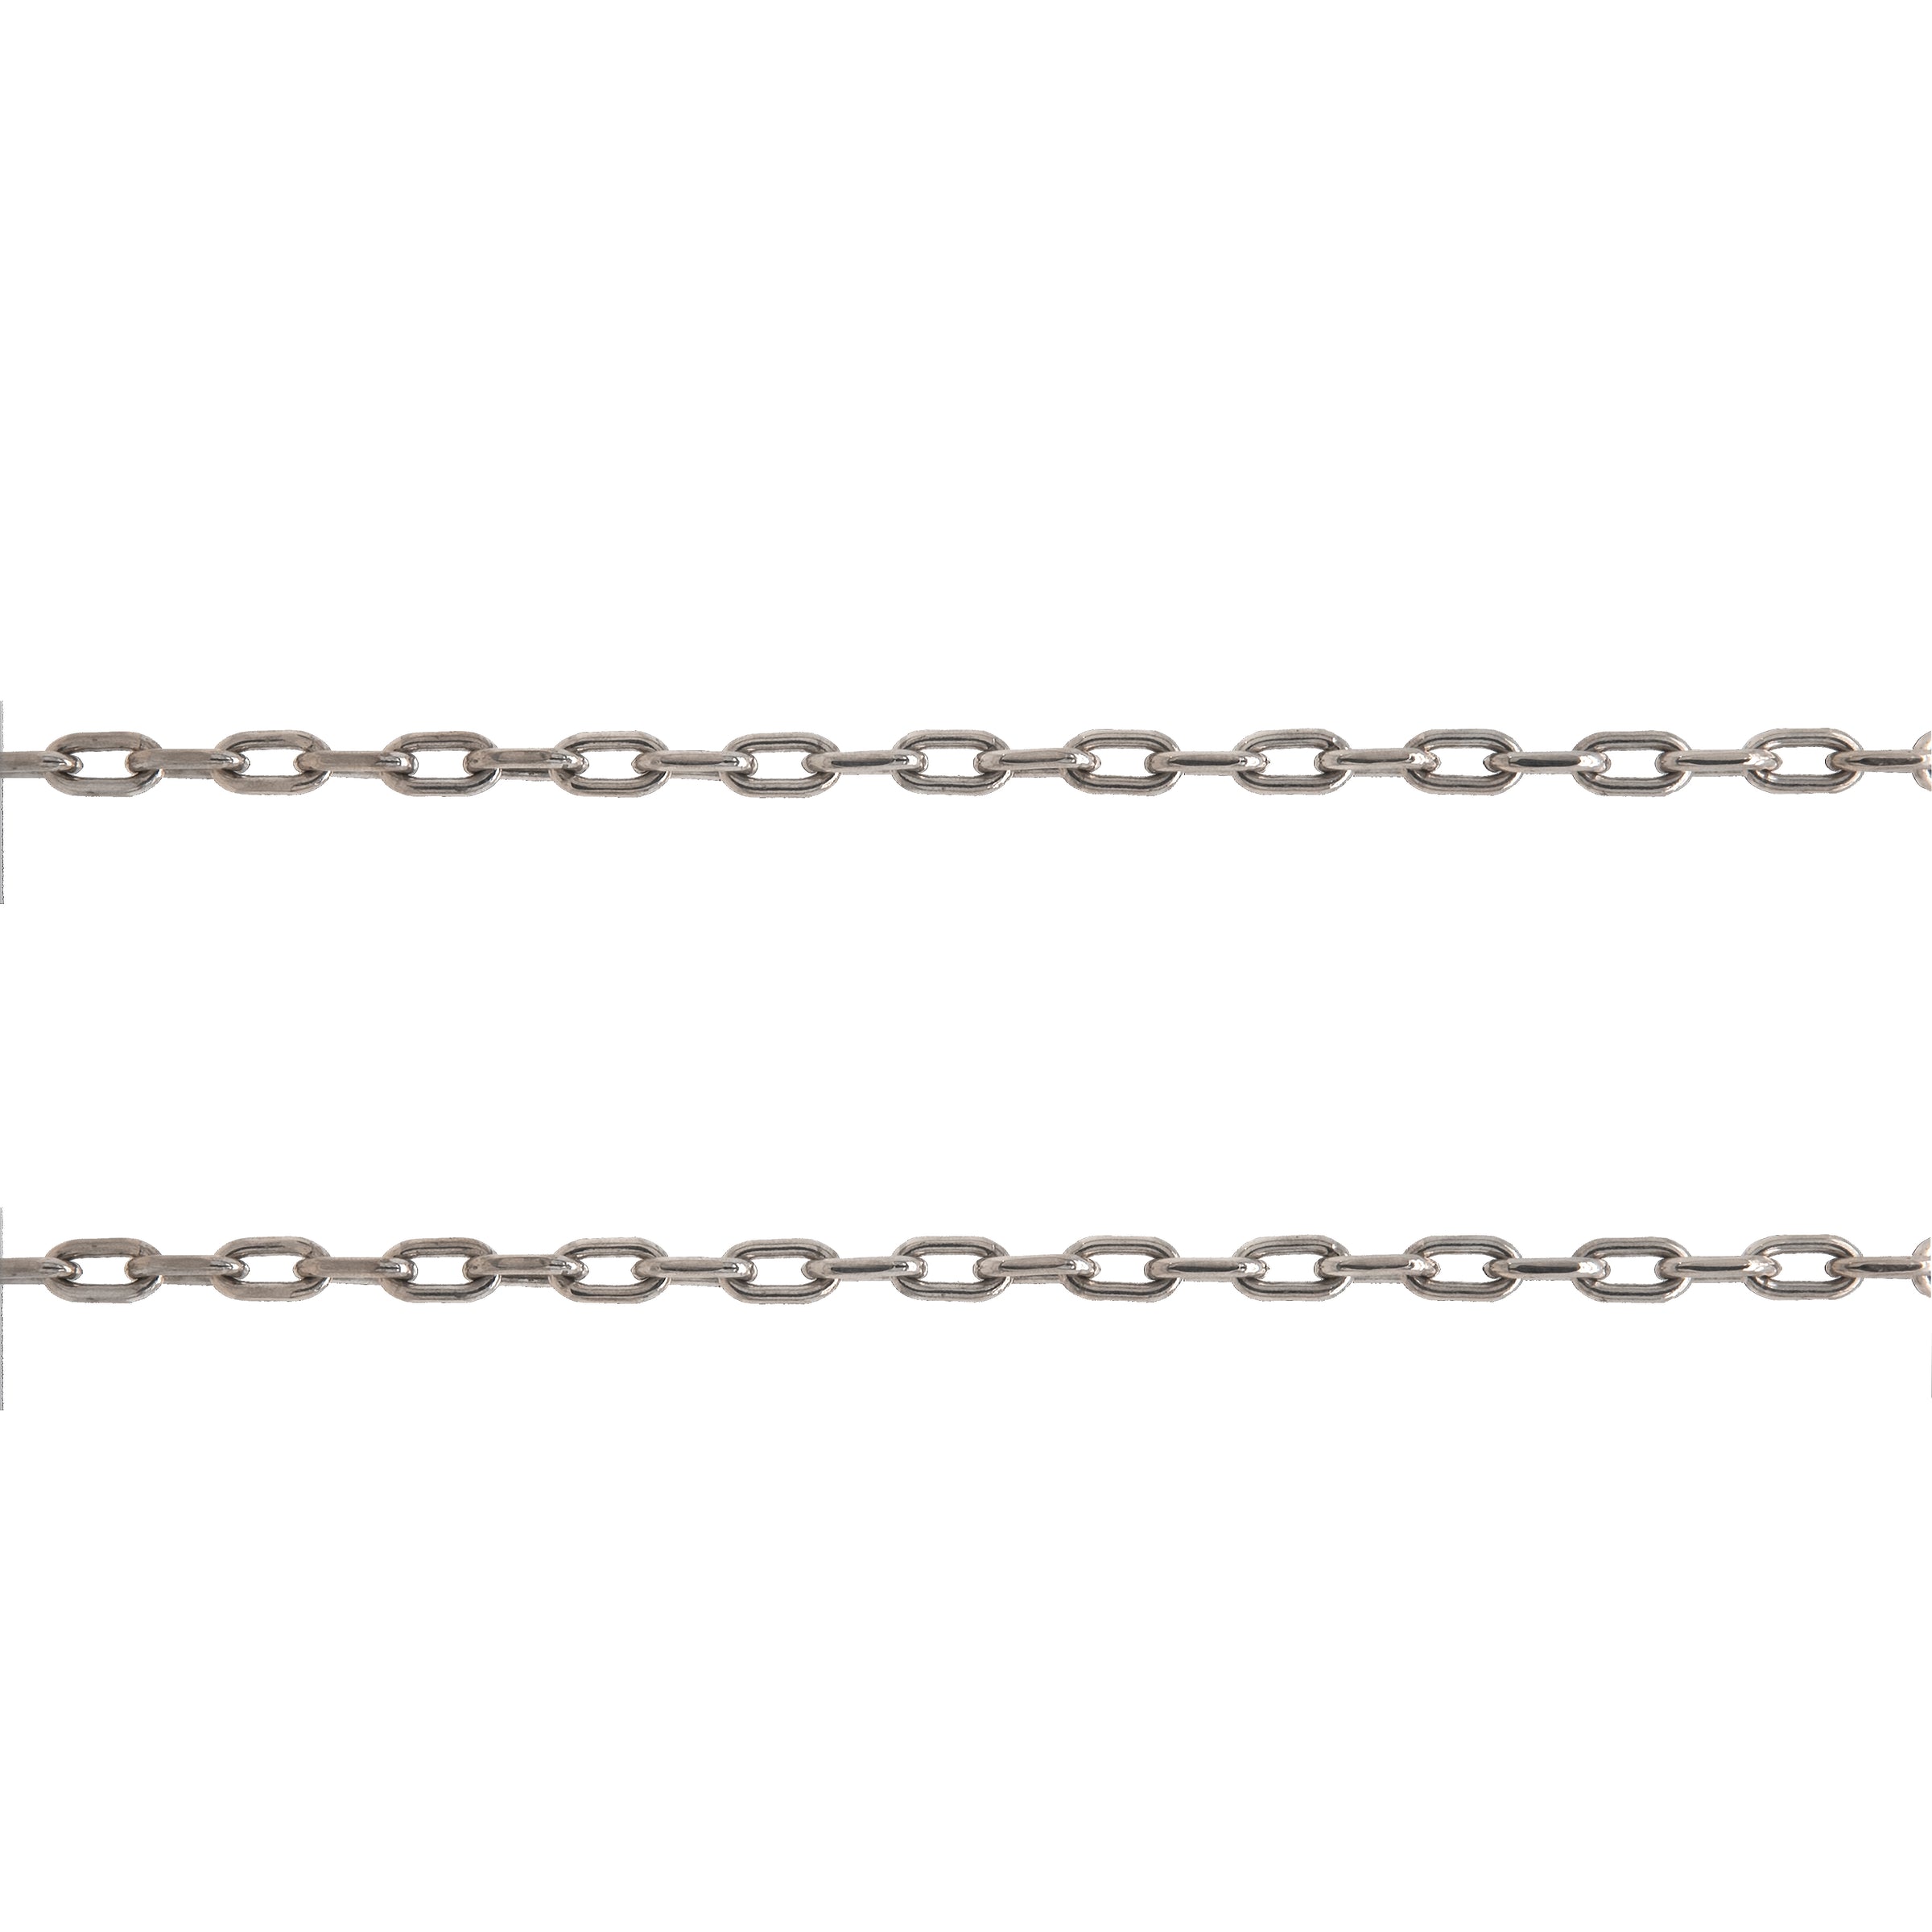 OVAL LINK CHAIN